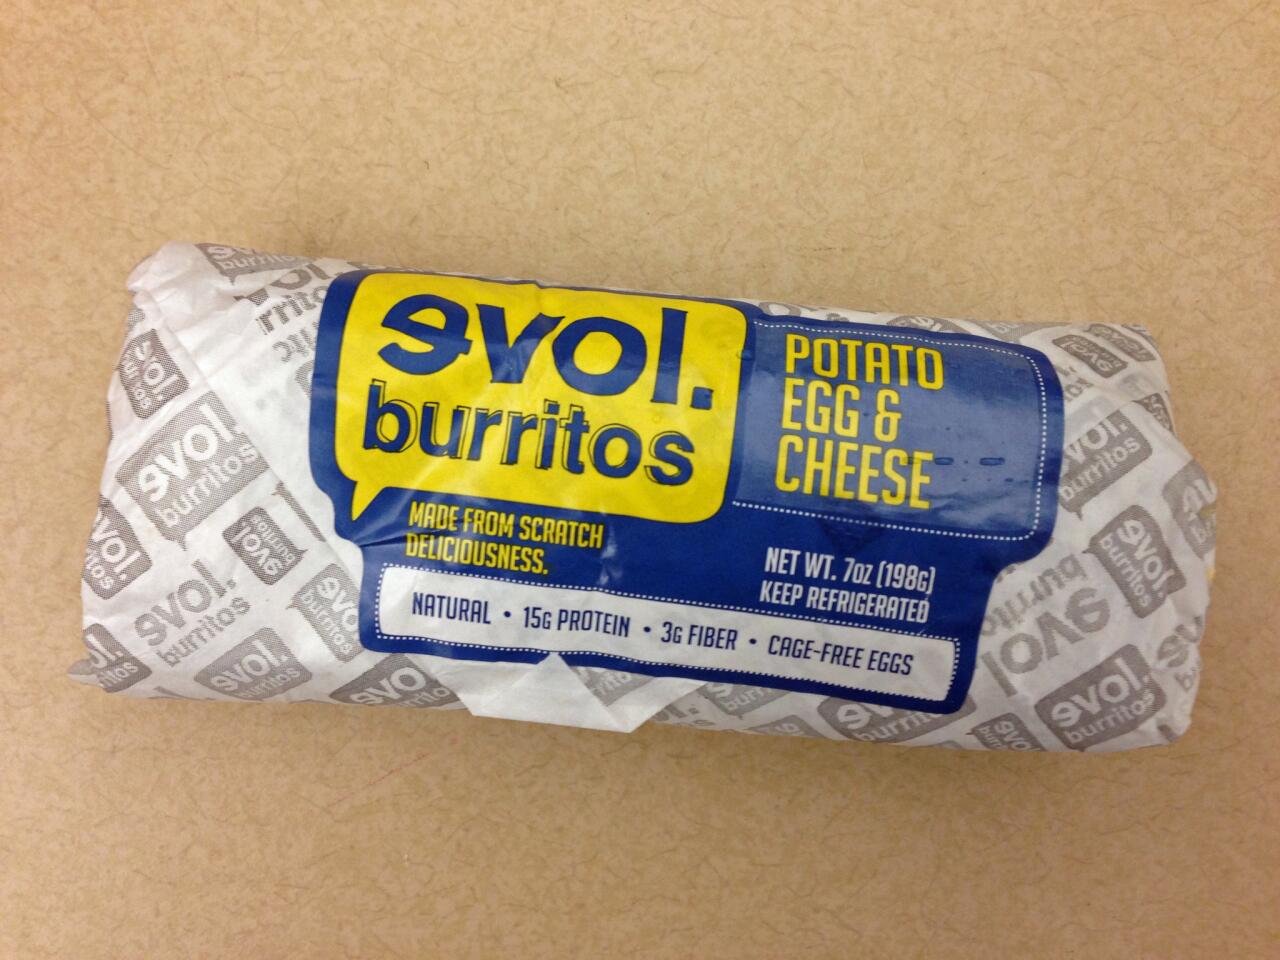 The burritos are delivered in a paper wrapper.